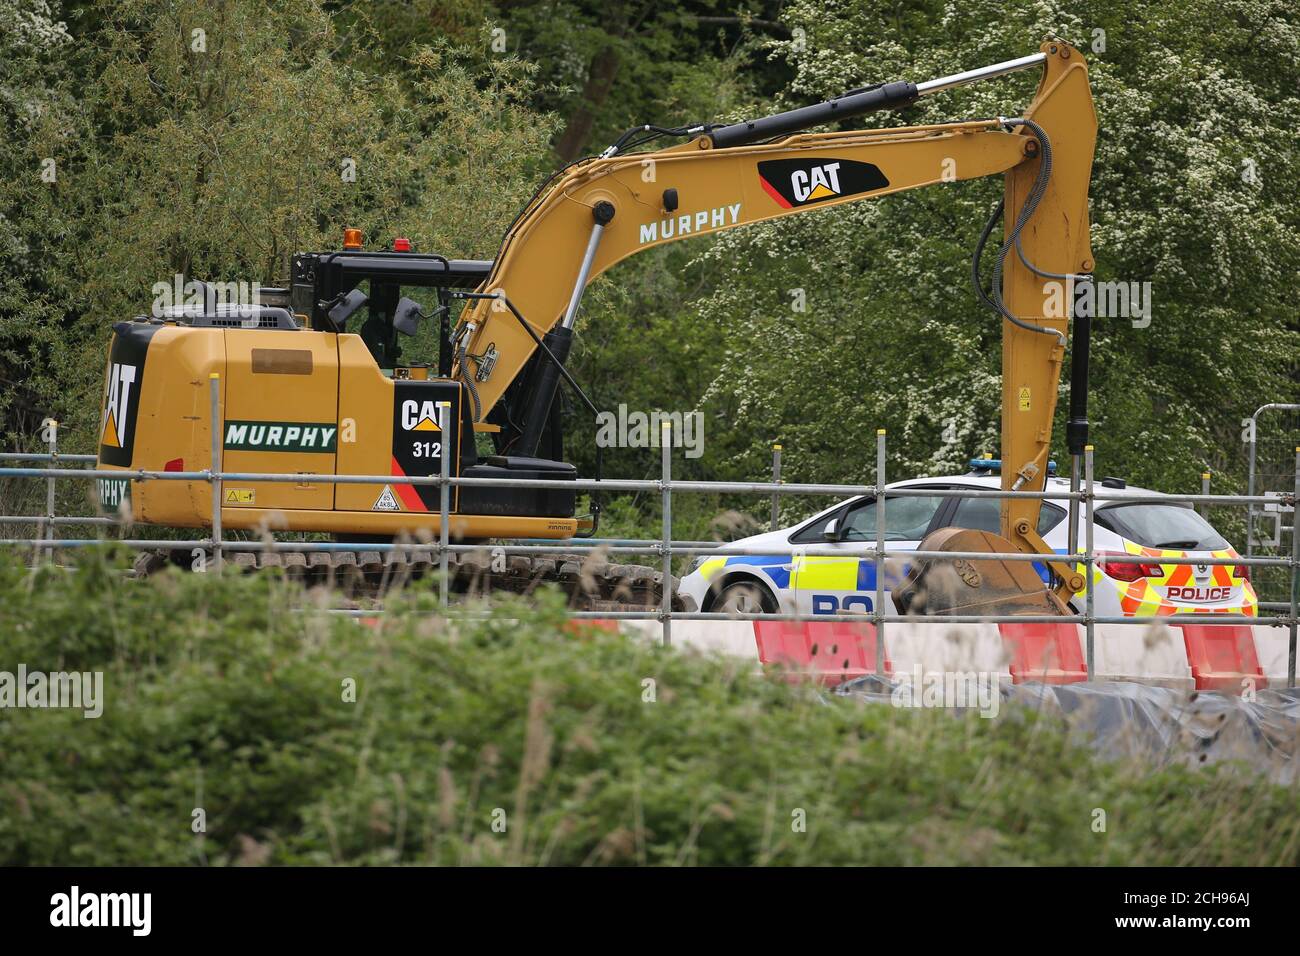 RETRANSMITTING CORRECTING LOCATION CORRECT CAPTION BELOW: Police search for the remains of a body at construction site in Sharnbrook, Bedfordshire after a head was found in a quarry in Cambridgeshire. Stock Photo